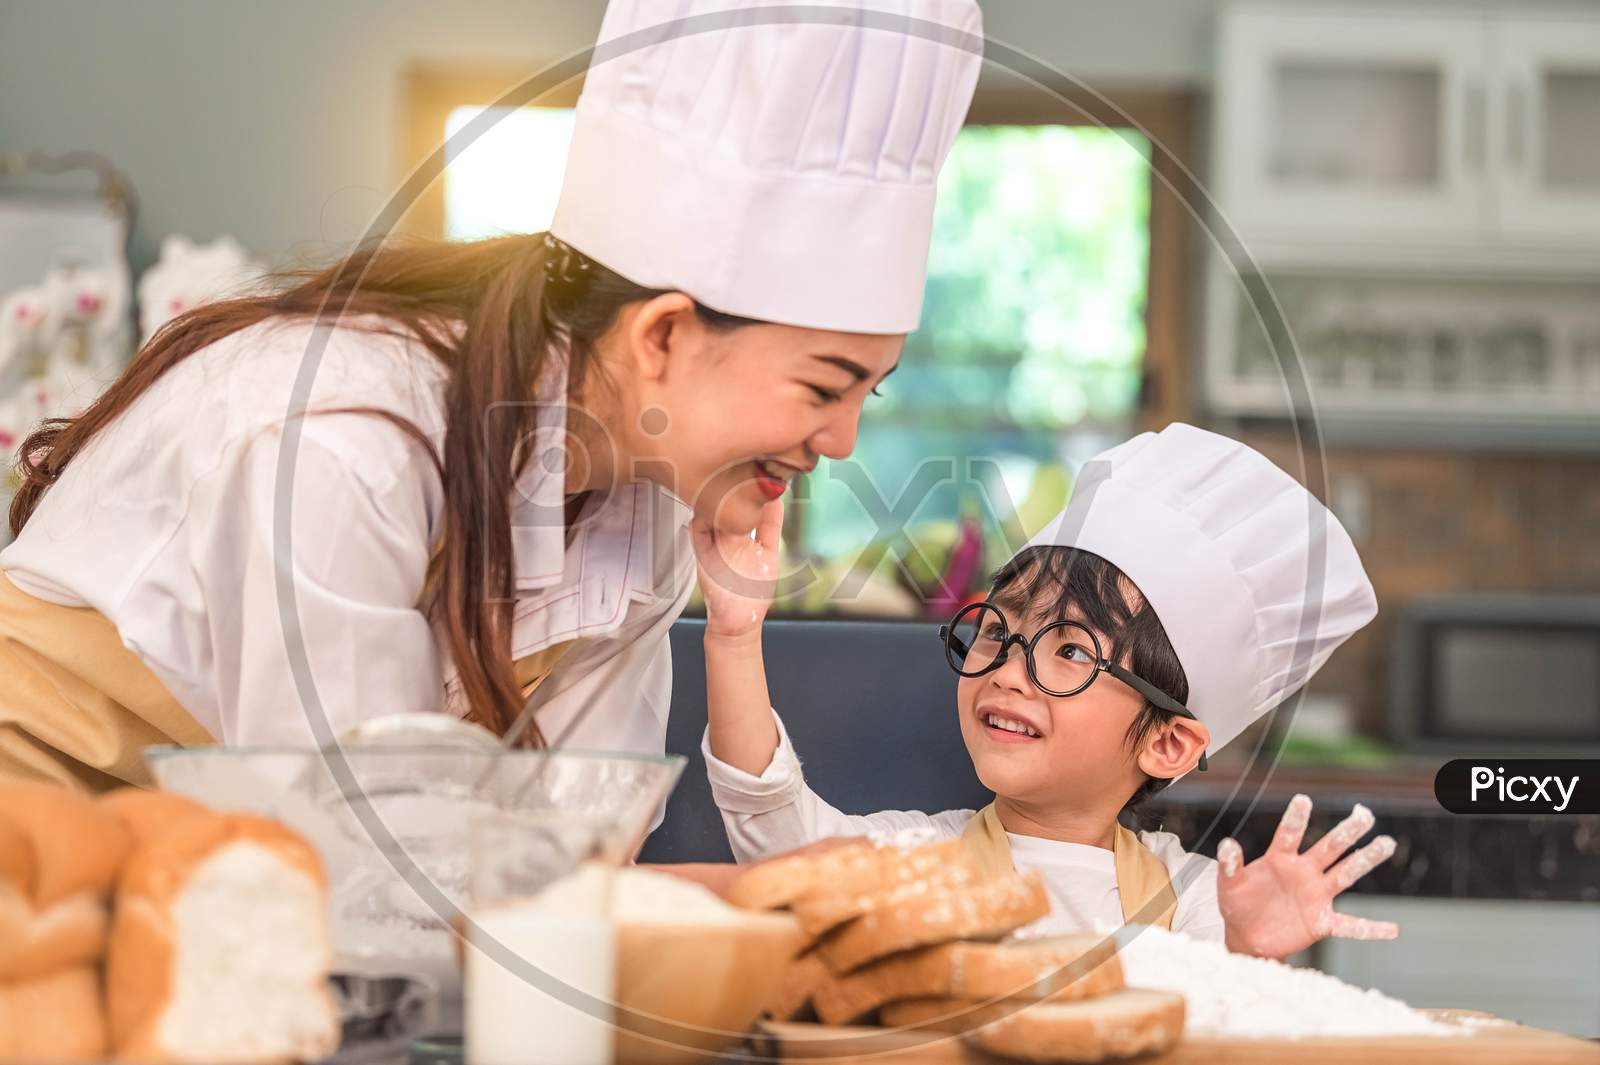 Cute Little Asian Boy Painting Beautiful Woman Face With Dough Flour. Chef Team Playing And Baking Bakery In Home Kitchen Funny. Homemade Food And Bread. Education Teamwork And Learning Concept.